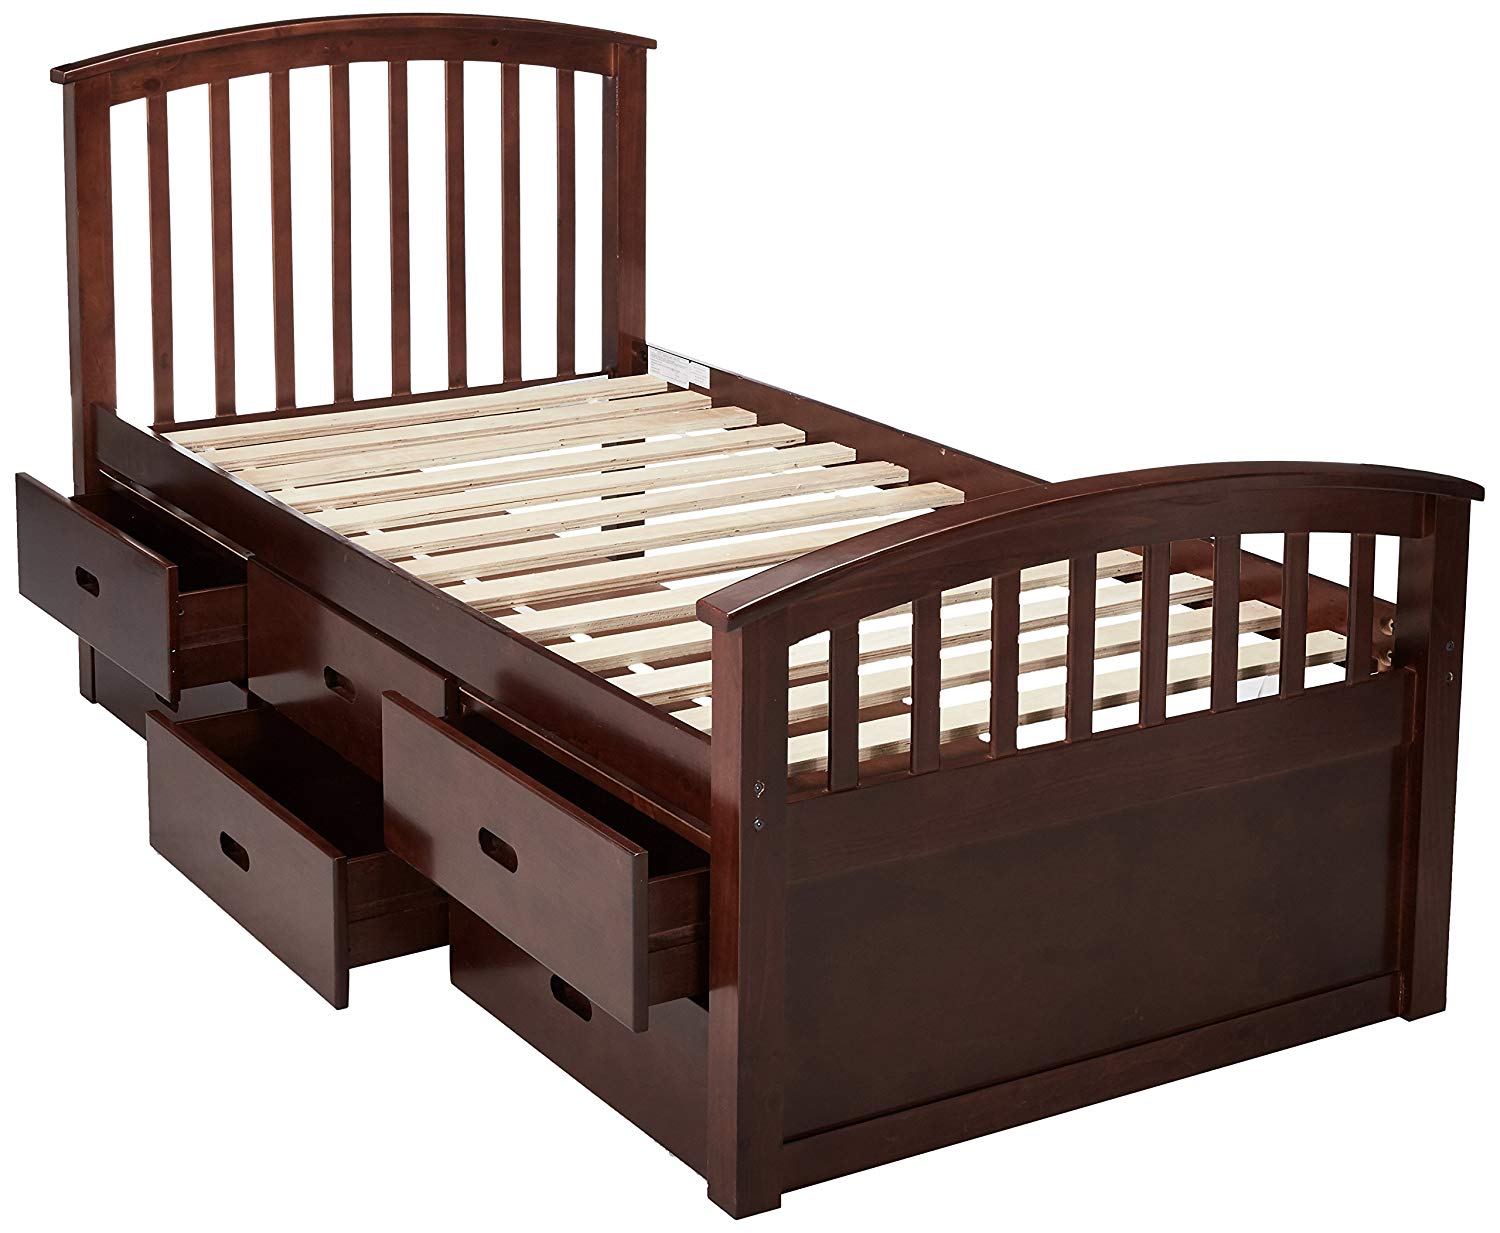 Donco Kids 6 Drawer Storage Bed, Dark Cappuccino, Twin - image 4 of 5